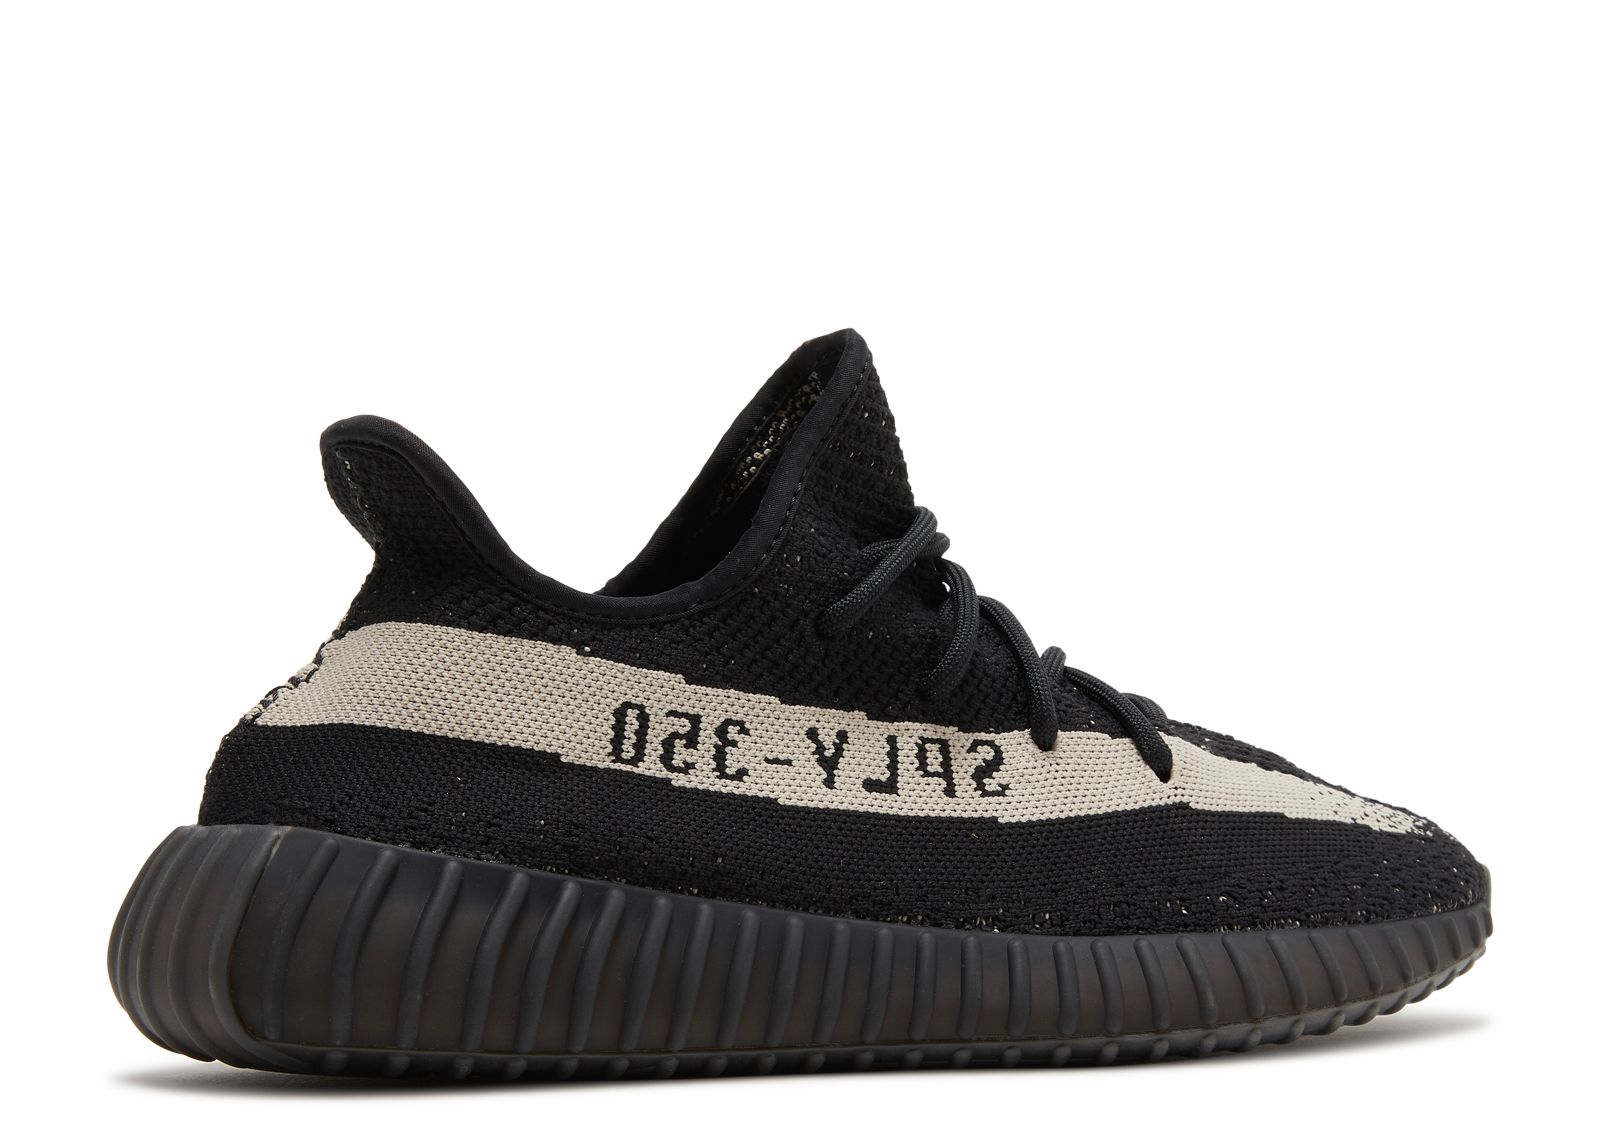 Yeezy Trainers, Cheap Yeezy Trainers on Sale 2021